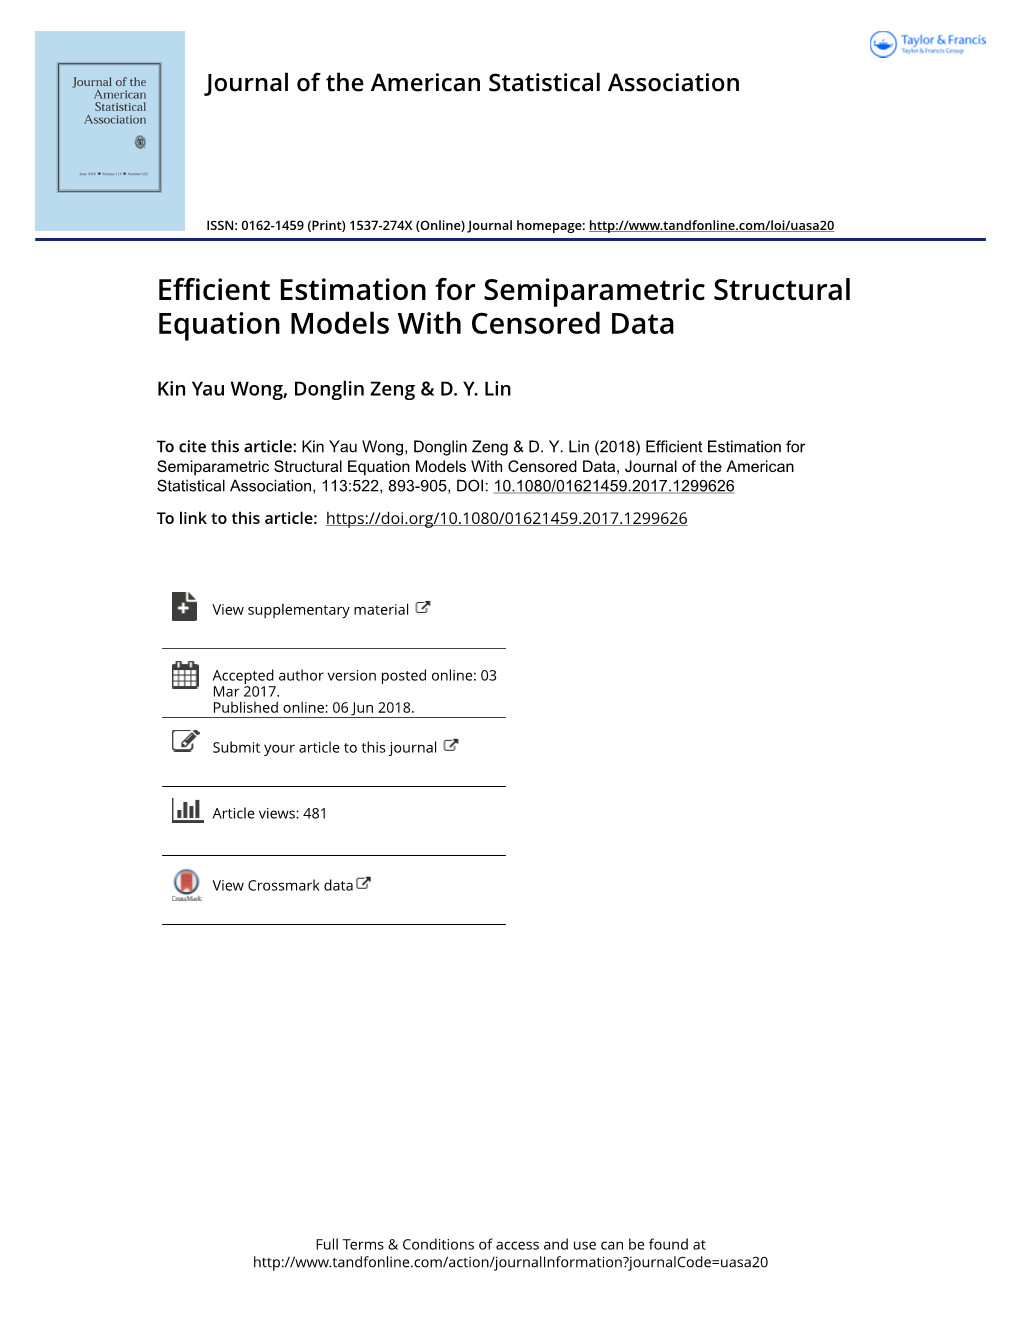 Efficient Estimation for Semiparametric Structural Equation Models with Censored Data